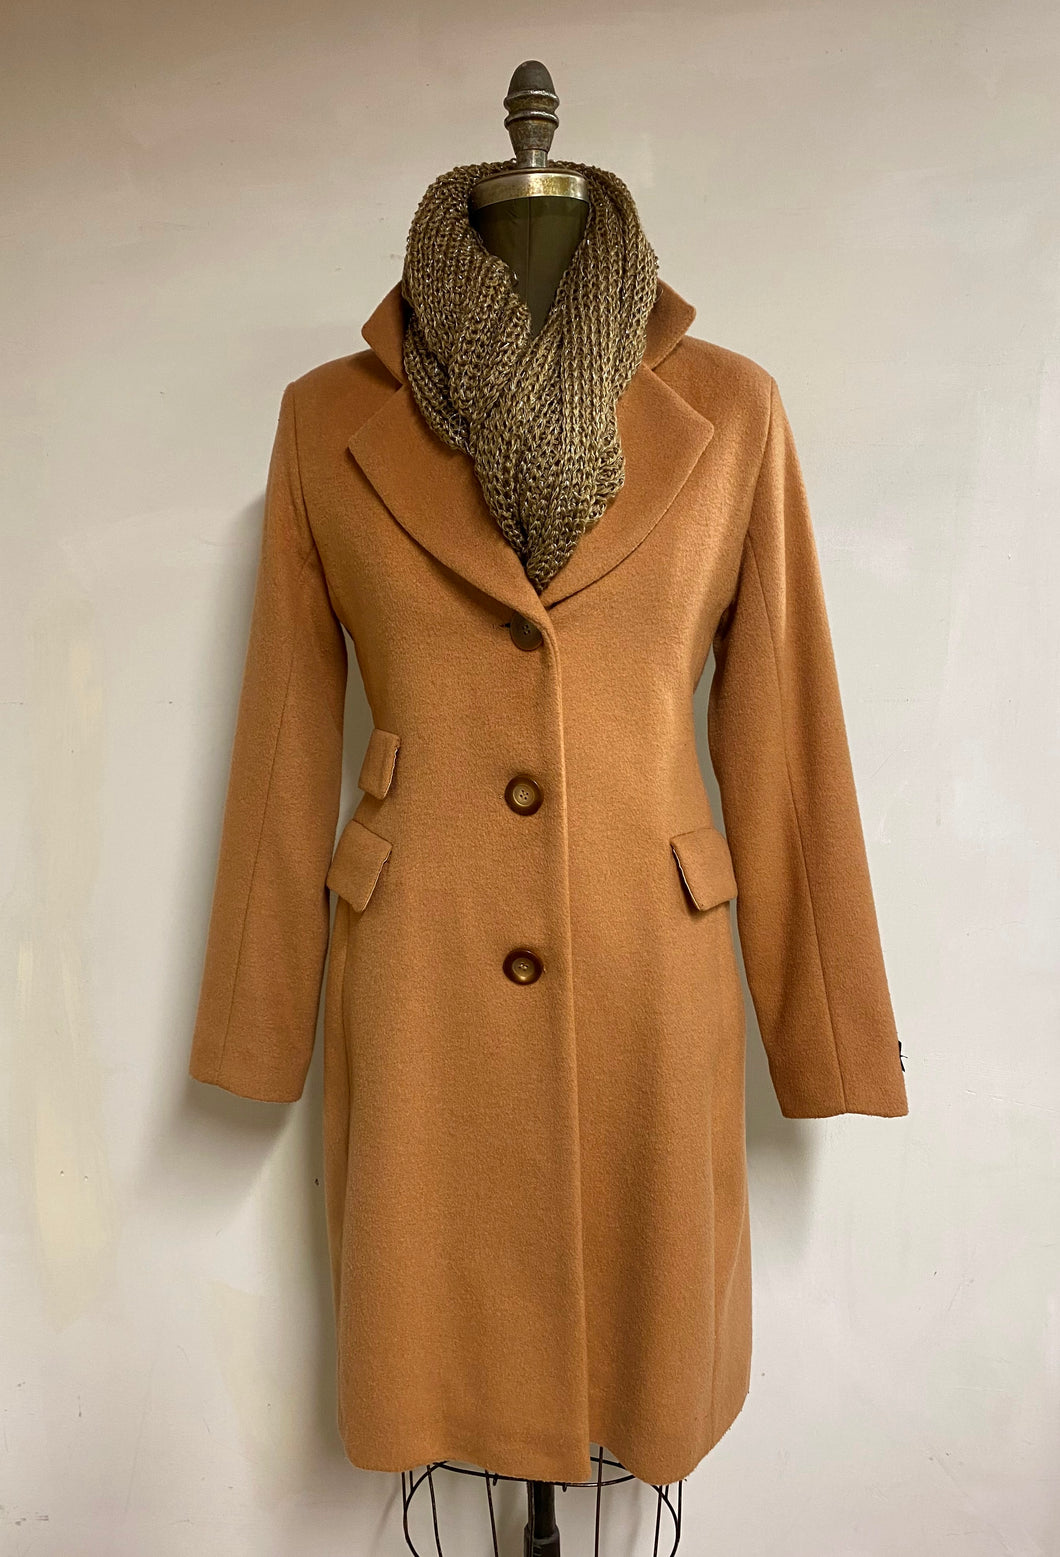 Mary Equestrian Style Coat - 50% Cashmere & Wool Blend